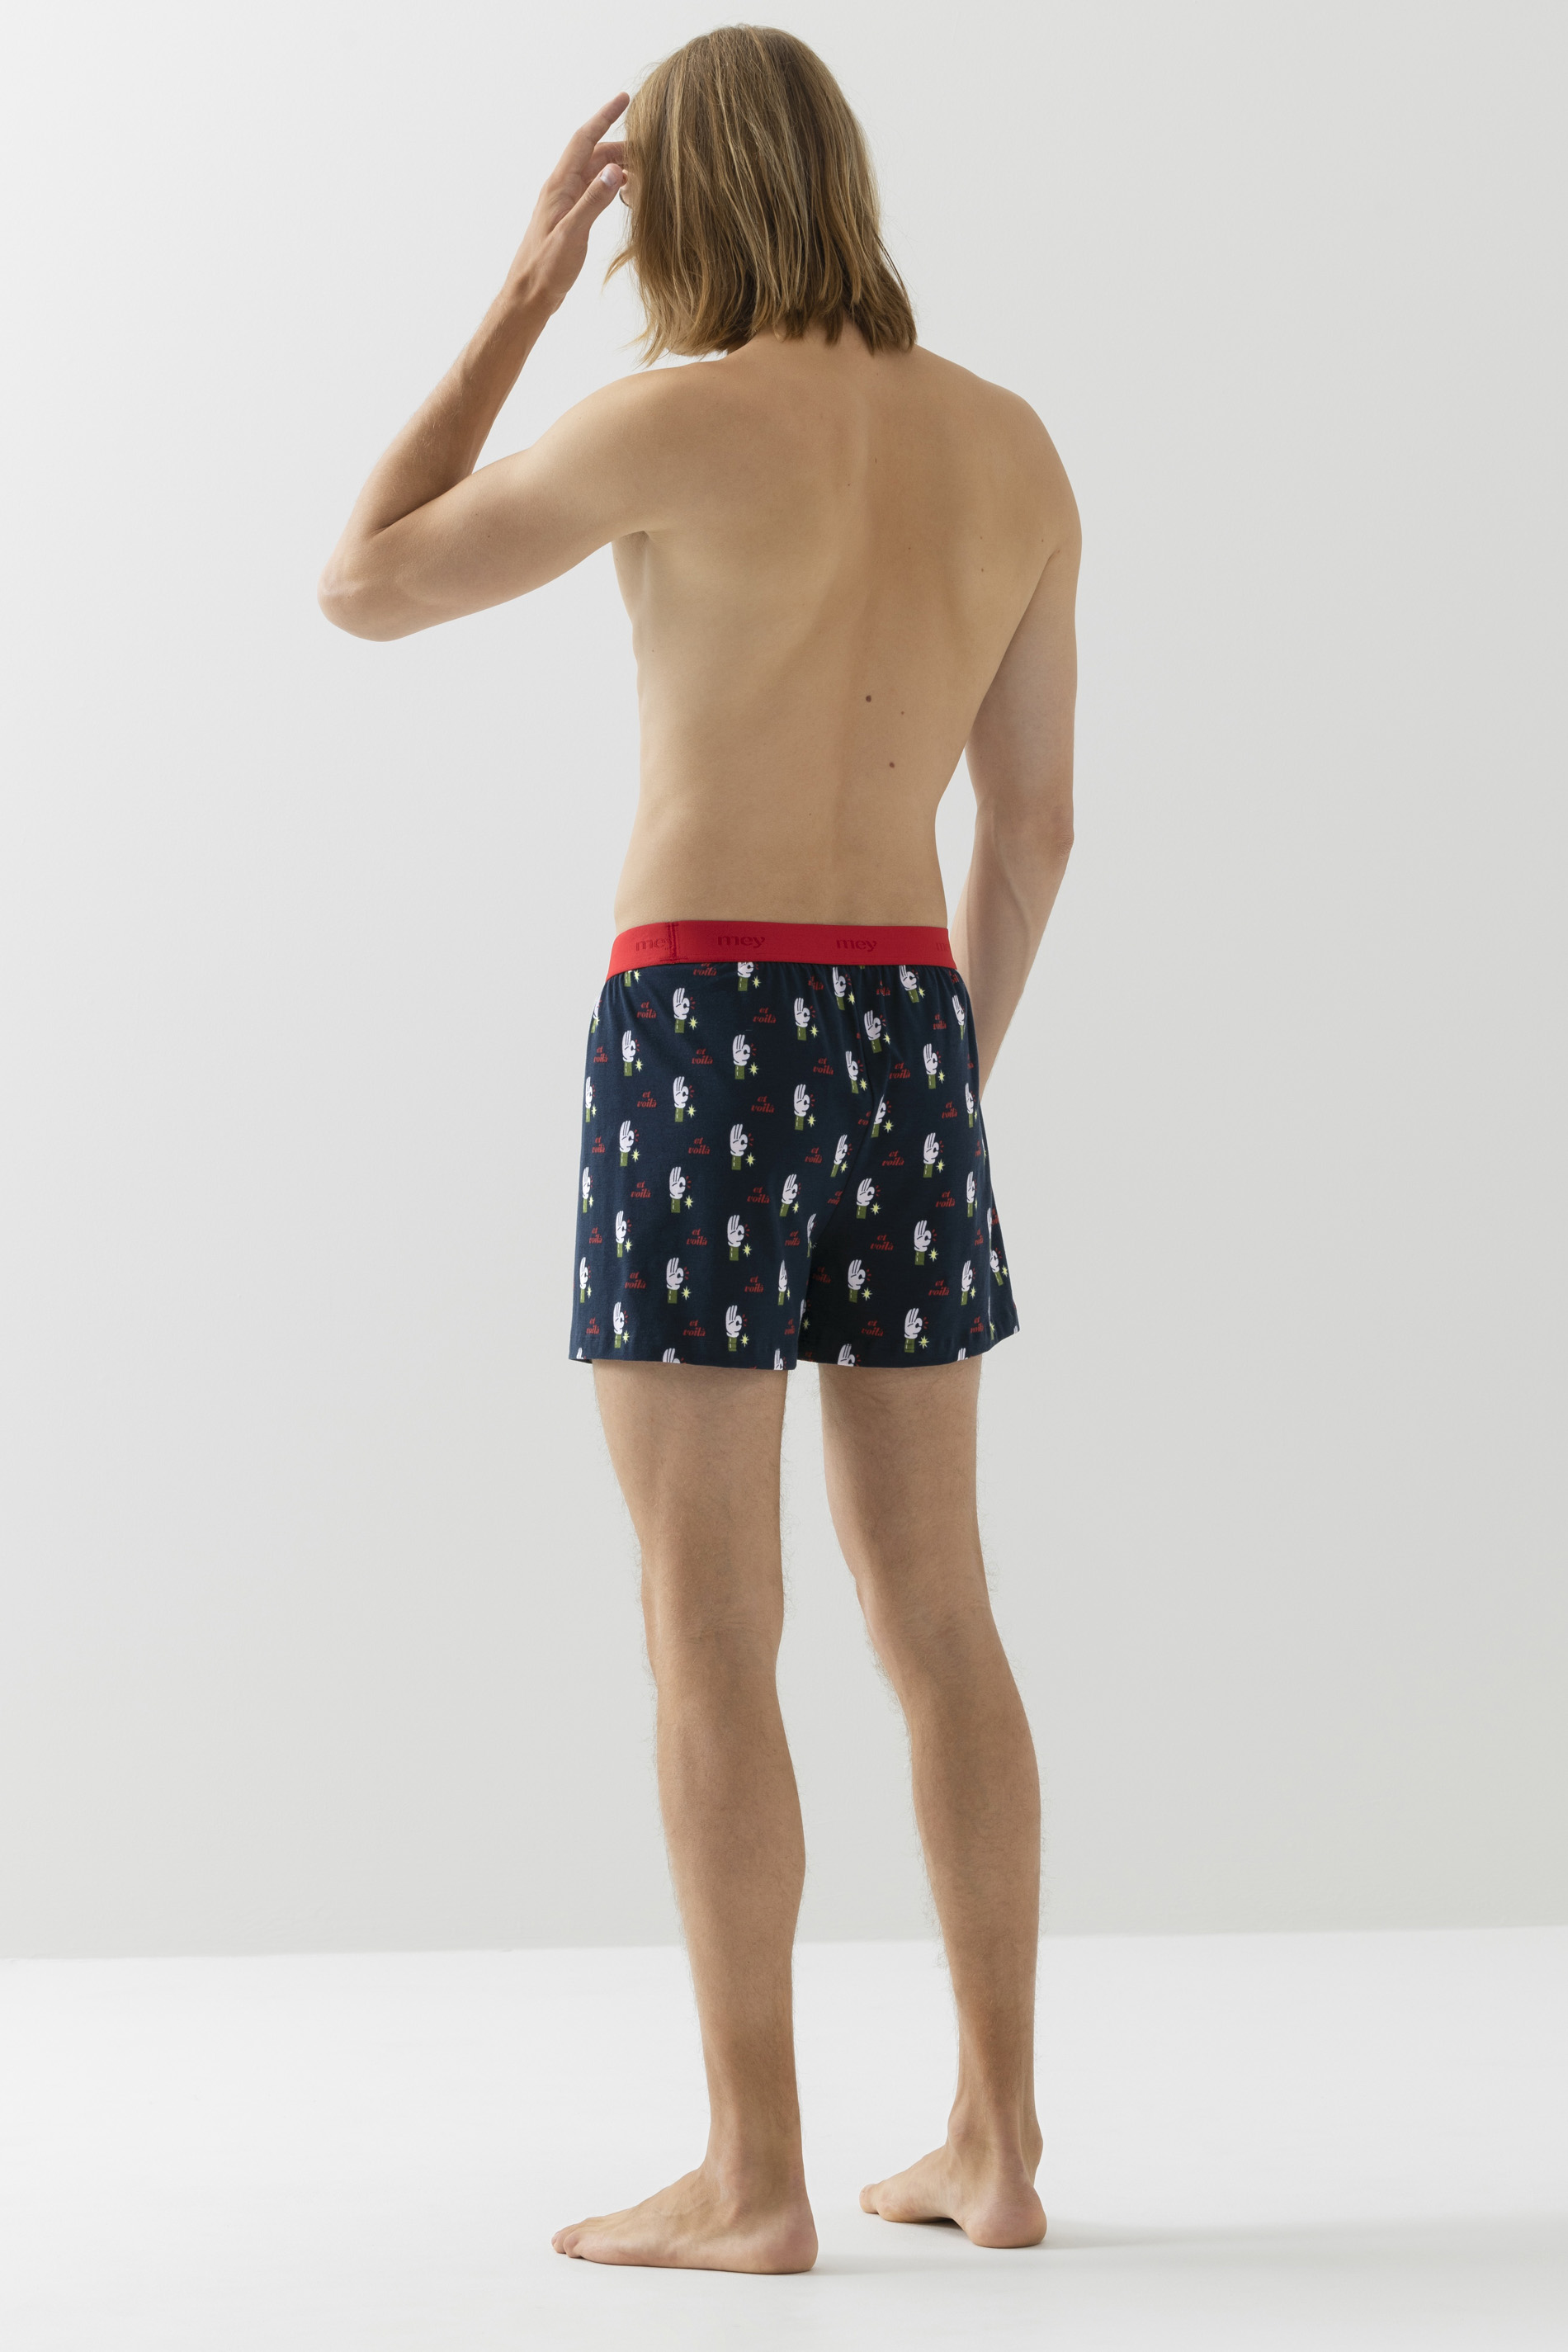 Boxer shorts Serie RE:THINK OKAY Rear View | mey®